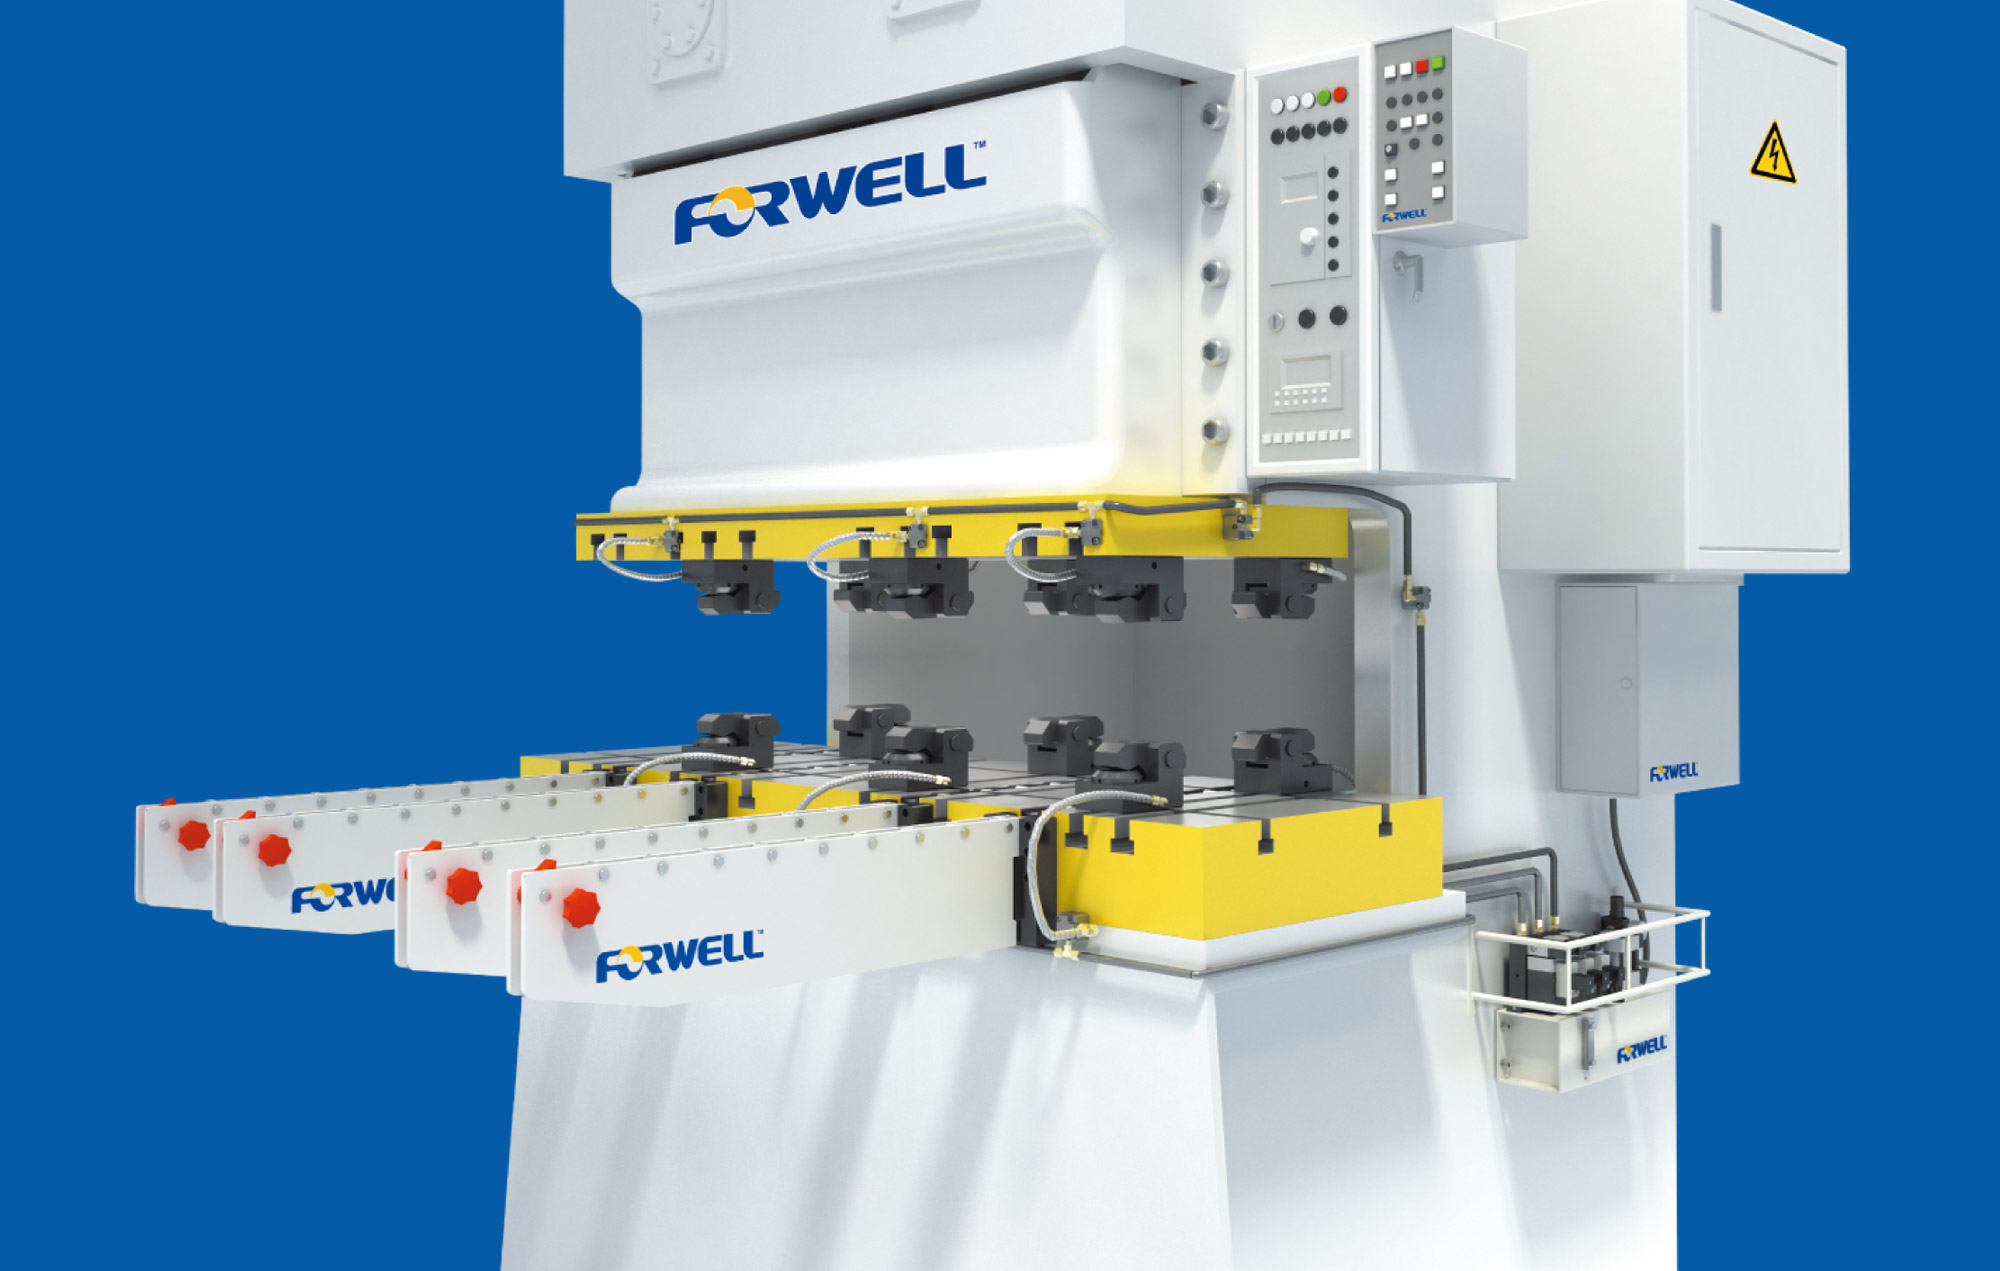 Forwell's Automatic Clamp Systems